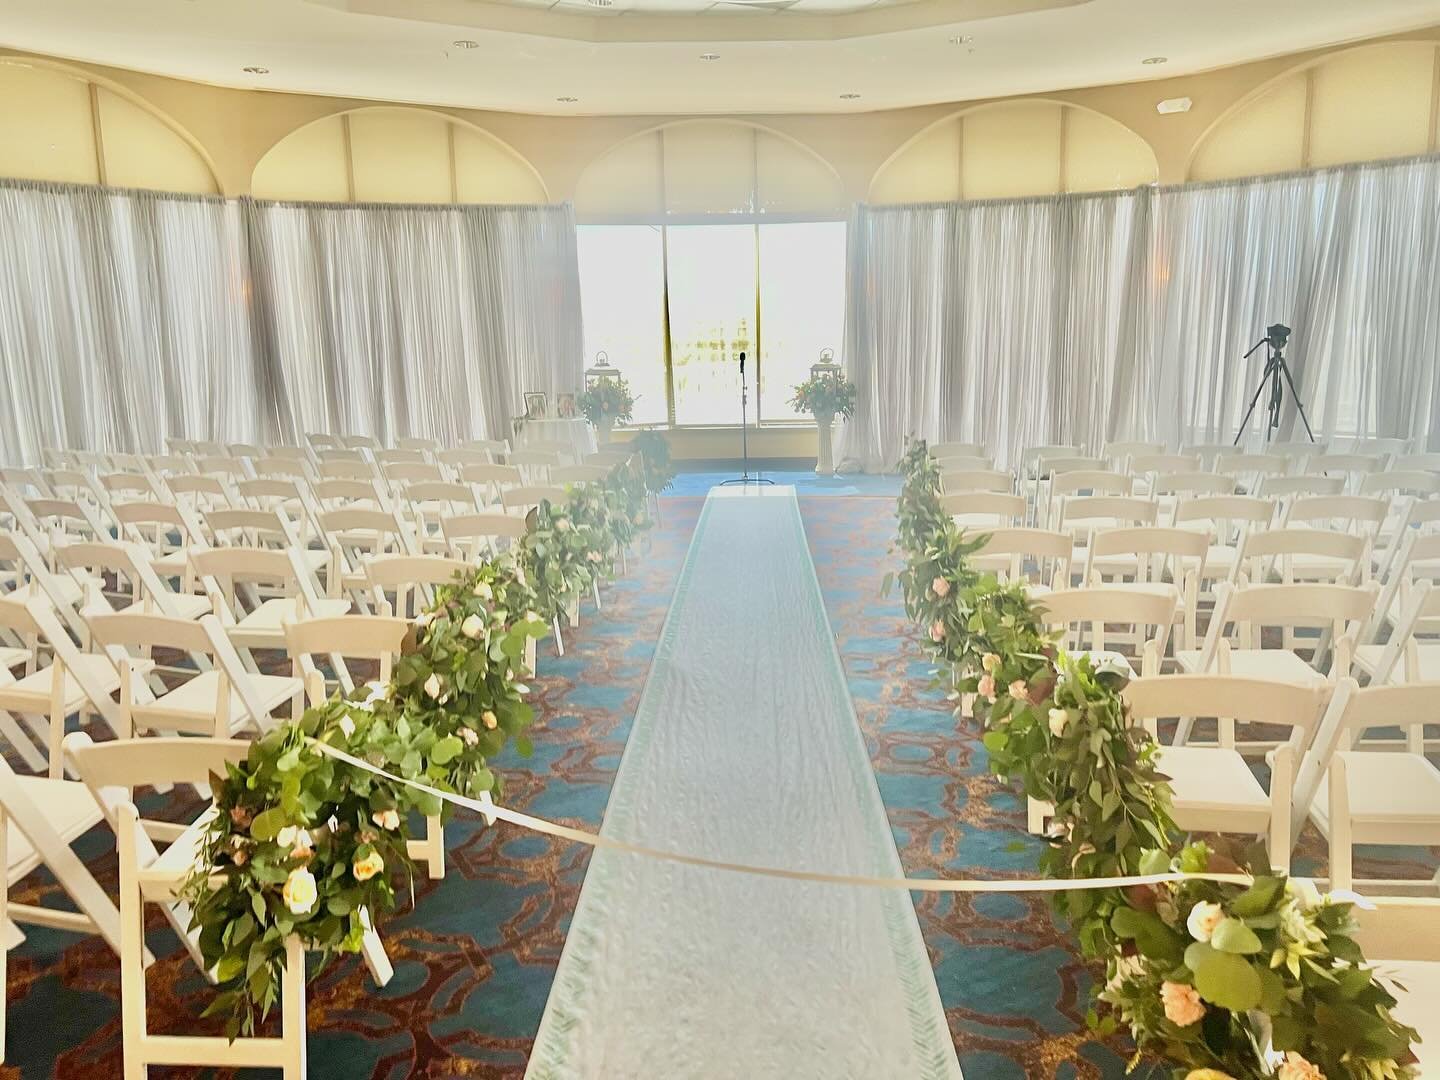 Our White Chiavari Chairs being used for a ceremony Hotel Tampa Riverwalk. Pleasure working with ABC Events! &mdash;&mdash;&mdash;&mdash;&mdash;&mdash;&mdash;&mdash;&mdash;&mdash;&mdash;&mdash;&mdash;&mdash;&mdash;&mdash;&mdash;&mdash;&mdash;&mdash;&